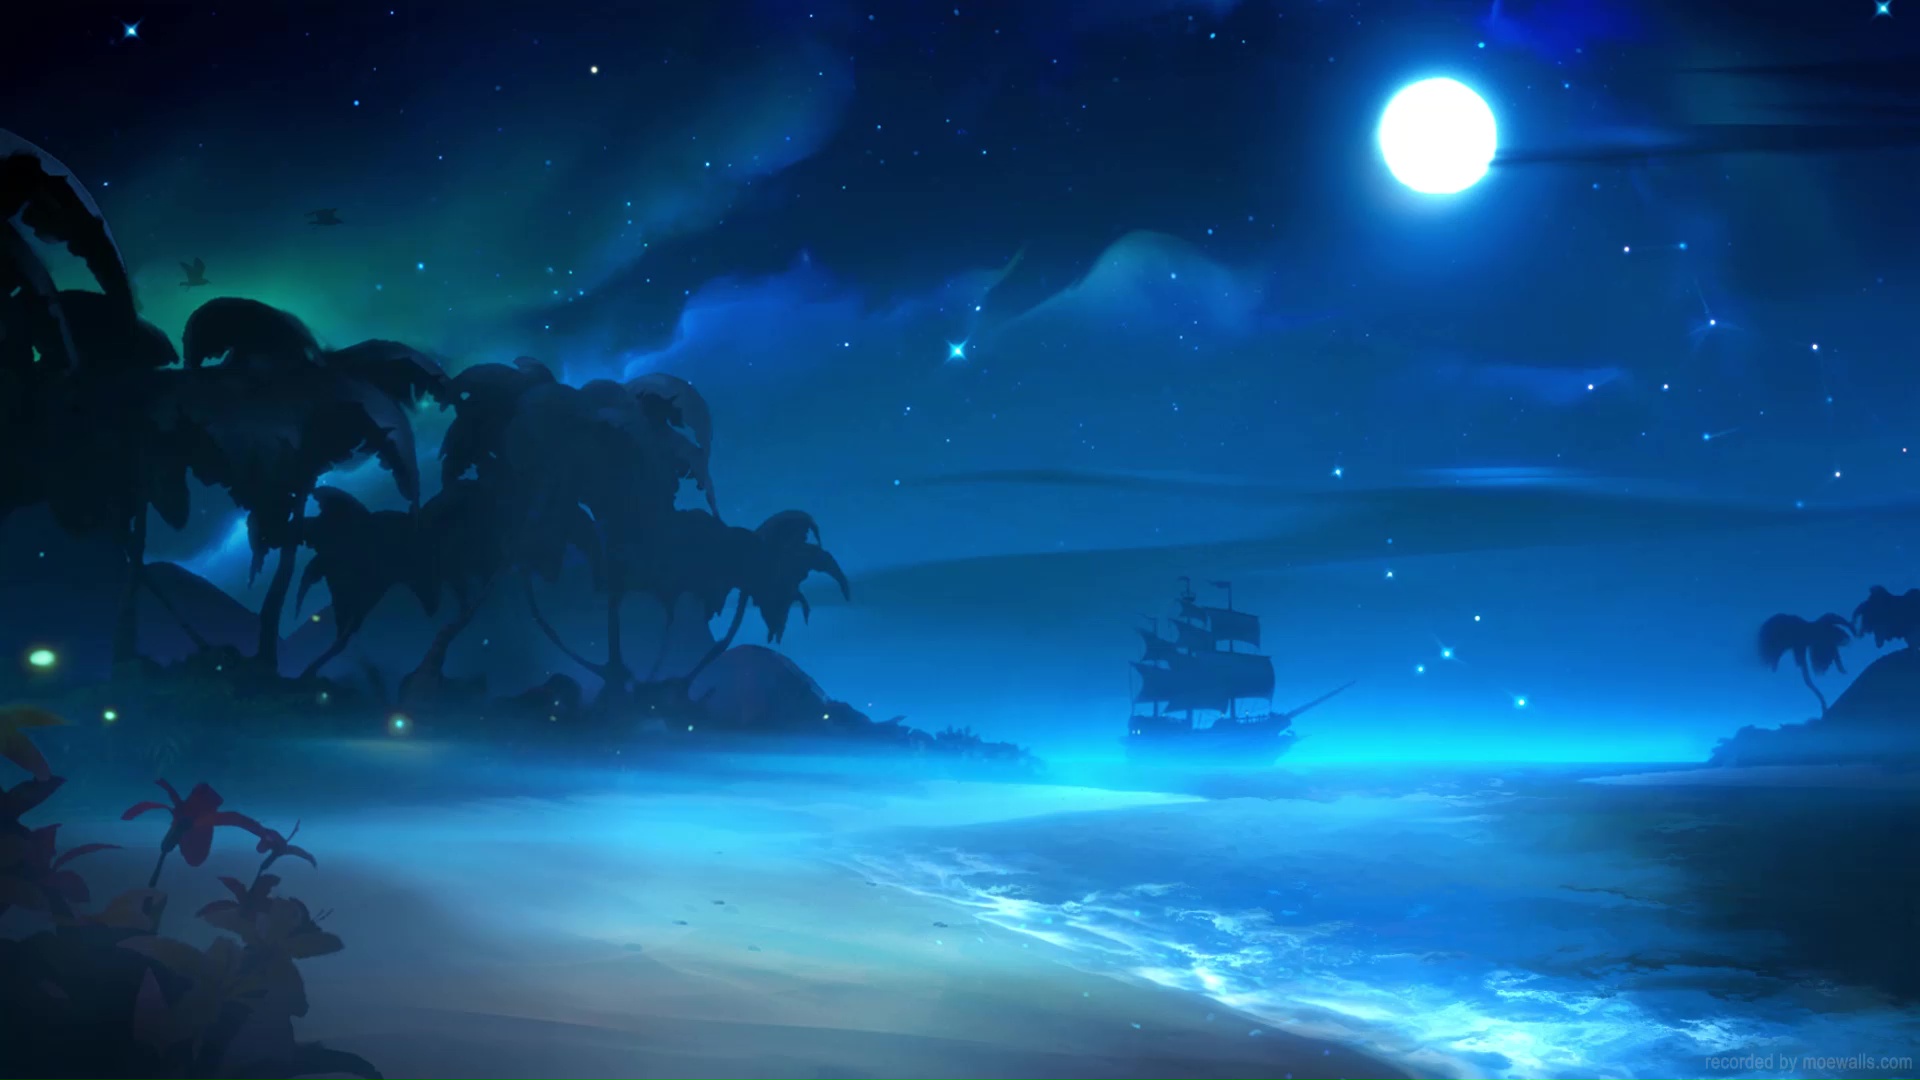 4 Sea Of Thieves Live Wallpapers, Animated Wallpapers - MoeWalls